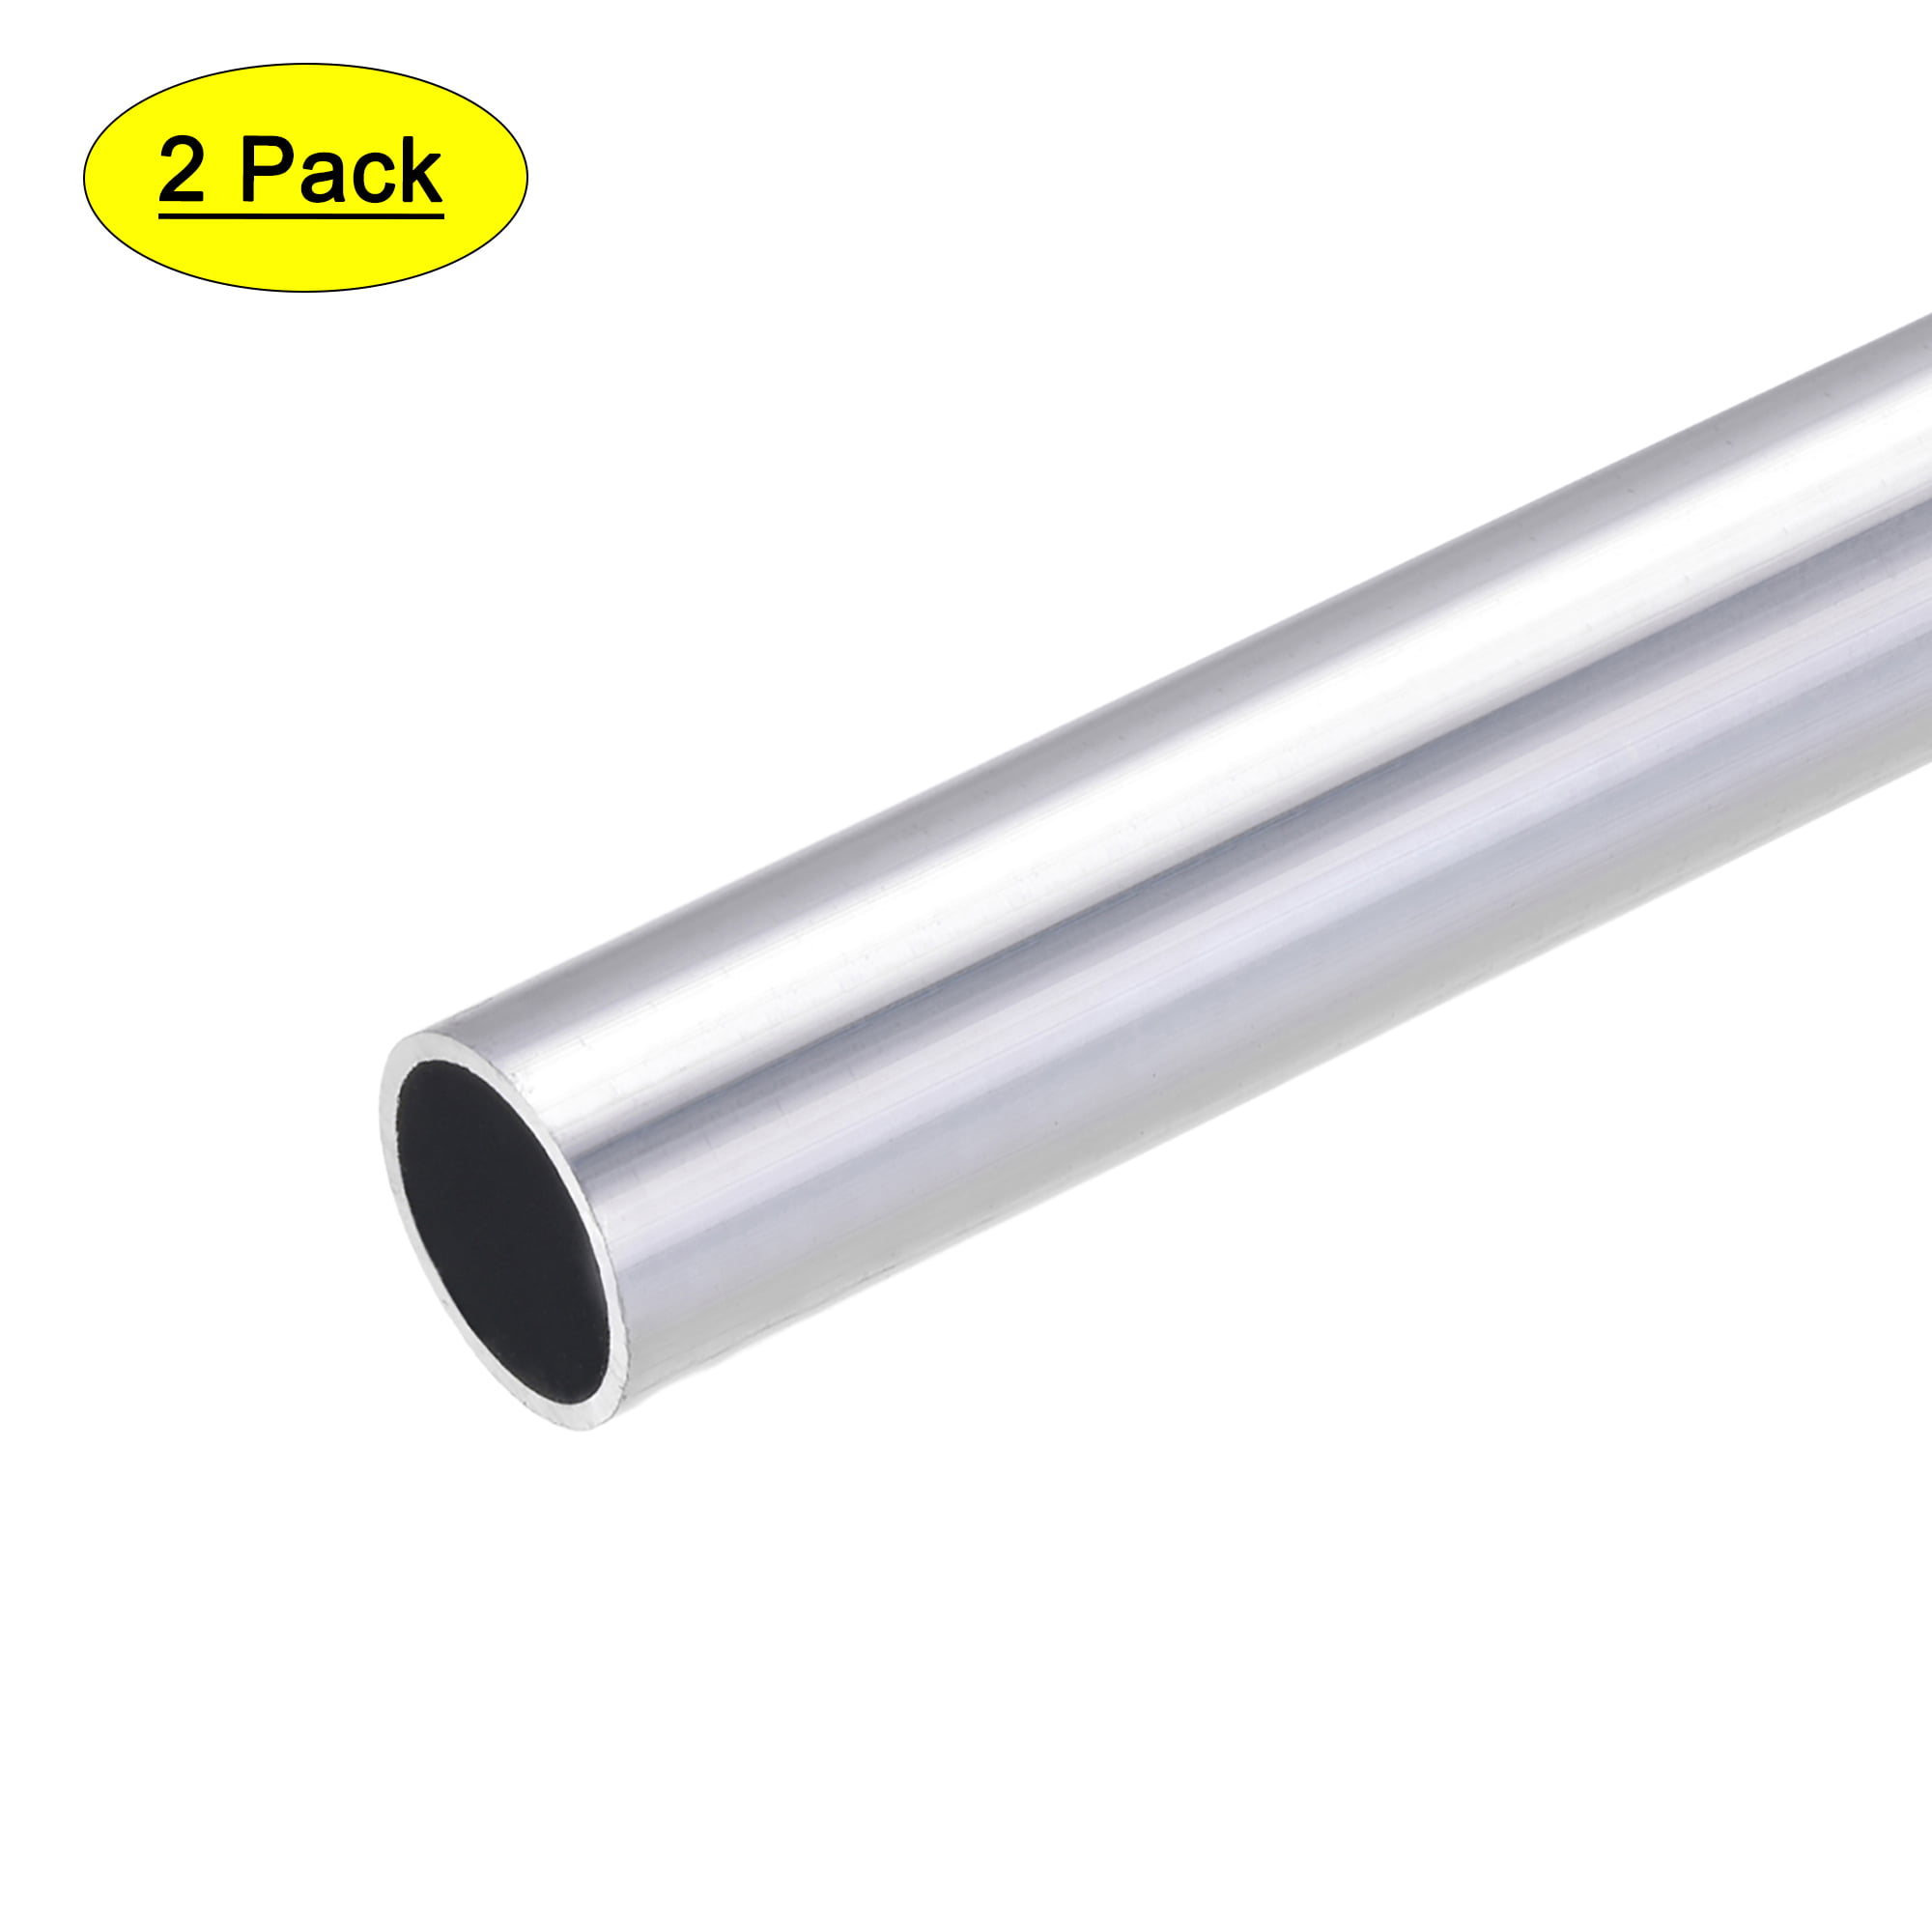 316 SEAMLESS STAINLESS STEEL TUBE X 200MM 12MM OD X 8MM ID 2MM WALL